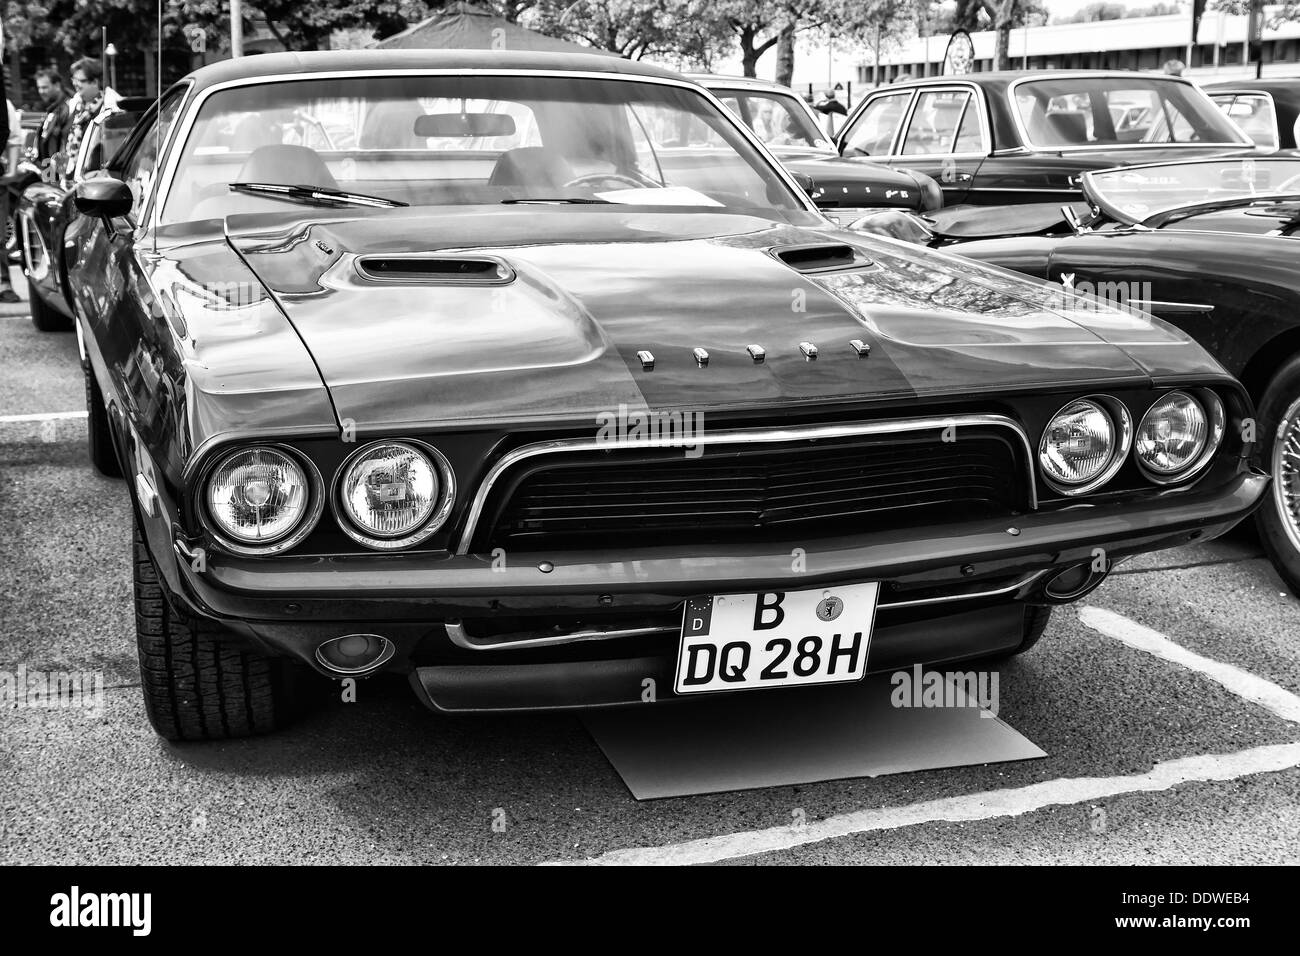 BERLIN - MAY 11: Car Dodge Challenger (black and white), 26th Oldtimer-Tage Berlin-Brandenburg, May 11, 2013 Berlin, Germany Stock Photo